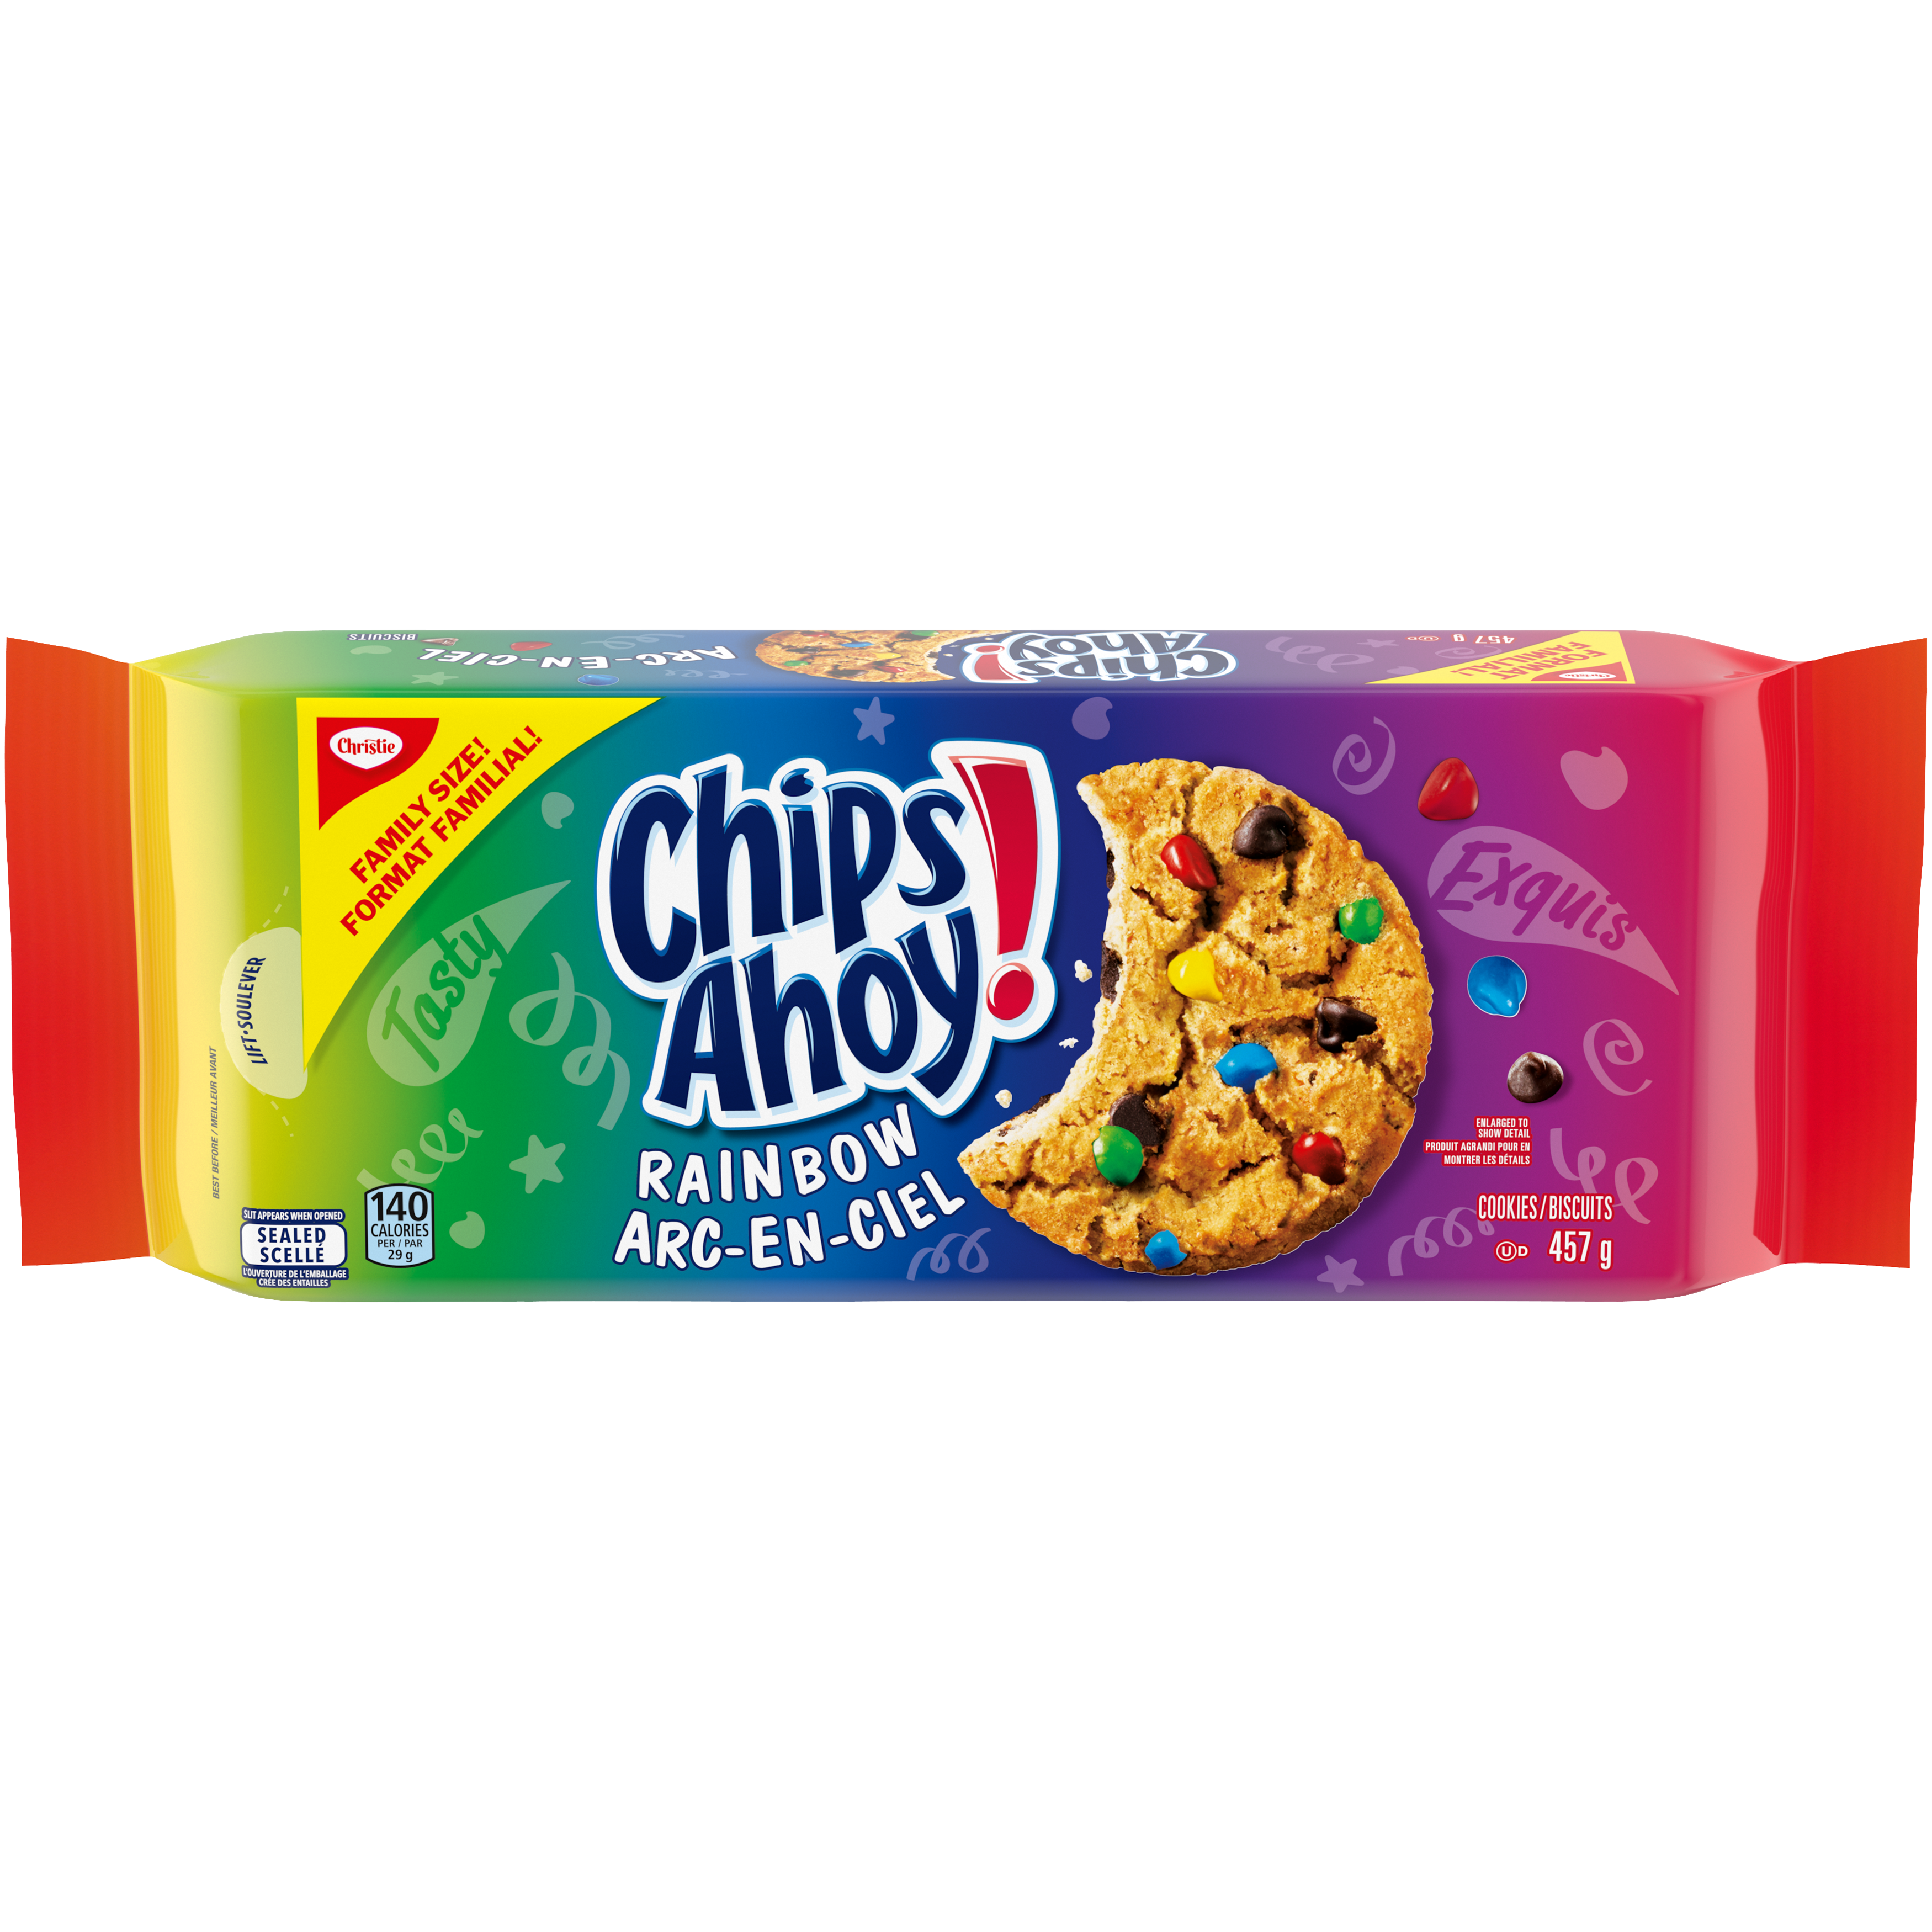 CHIPS AHOY! Rainbow Chocolate Chip Cookies, 1 Family Resealable Pack (457g)-1